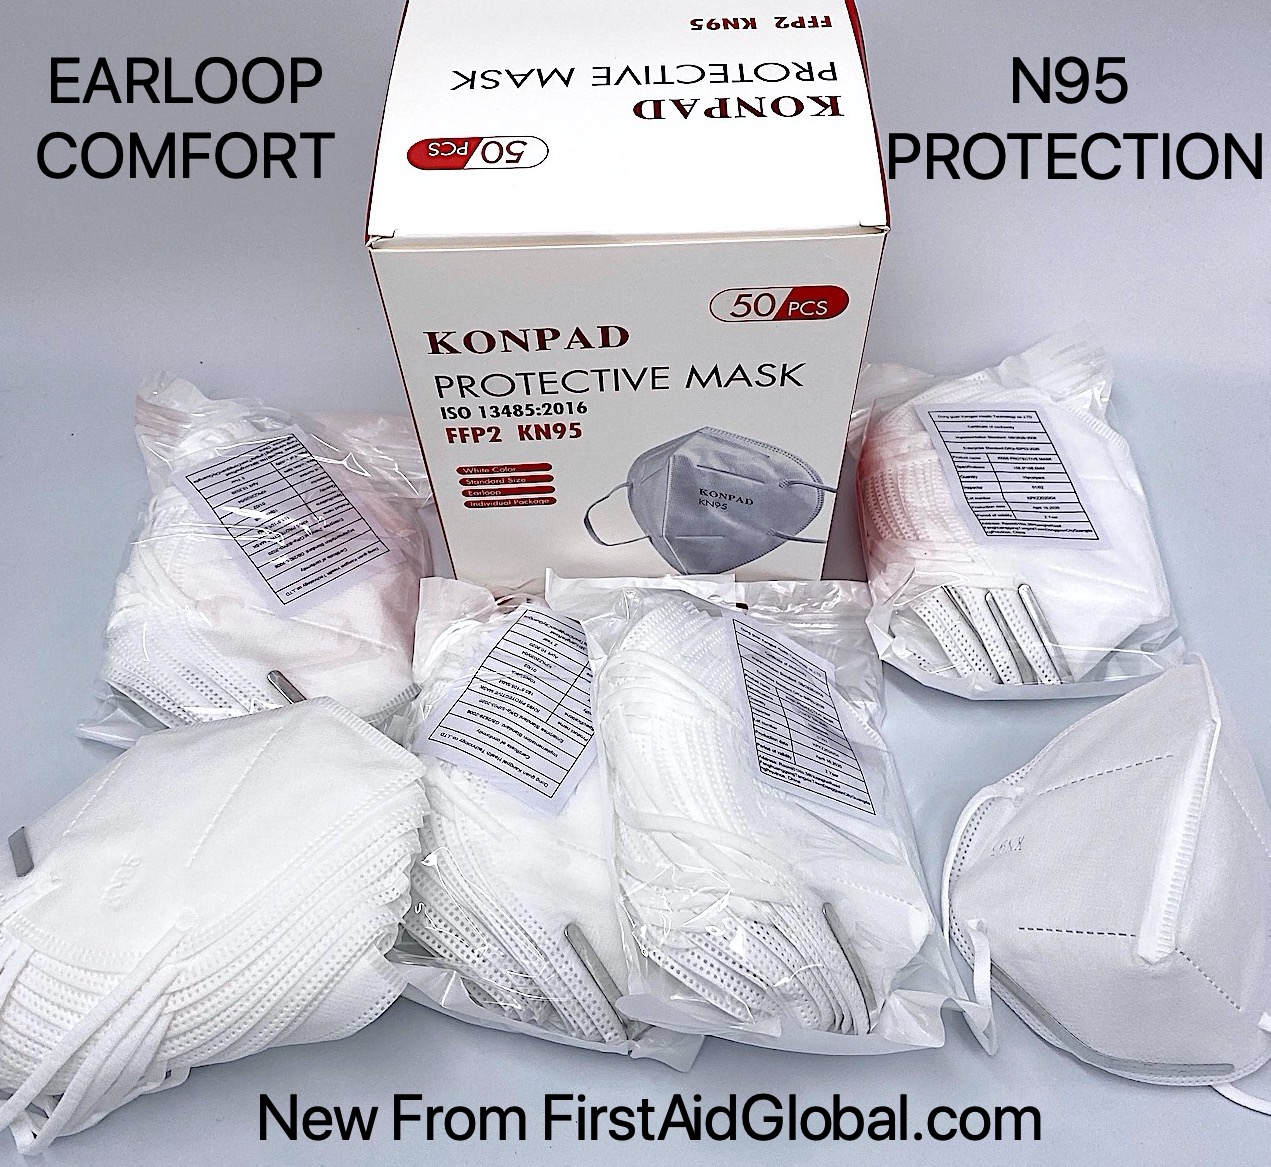 KN95 Earloop Masks are extremely comfortable and more affordable than traditional N95 Masks